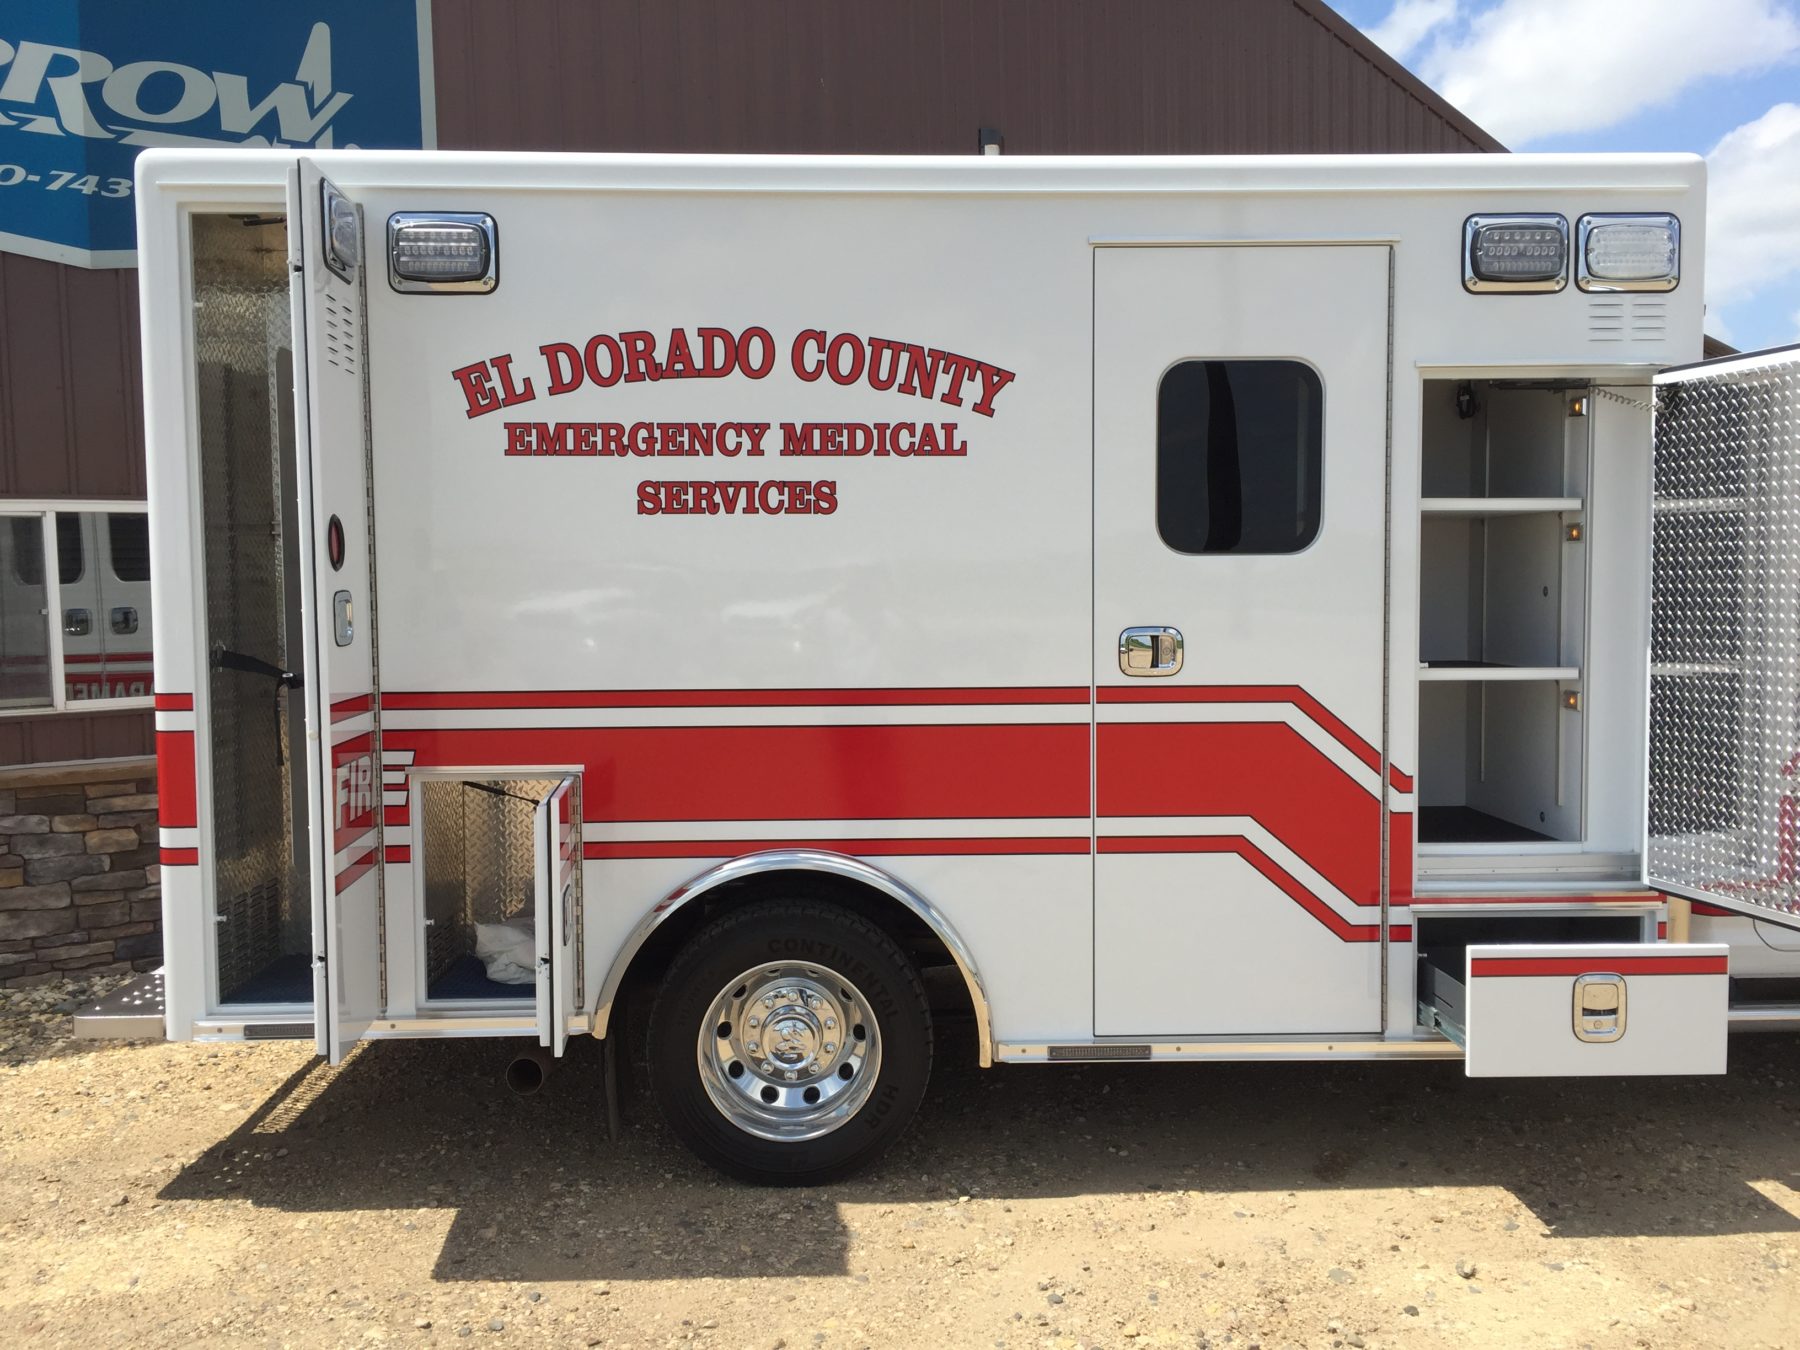 2017 Ram 4500 4x4 Heavy Duty Ambulance For Sale – Picture 6